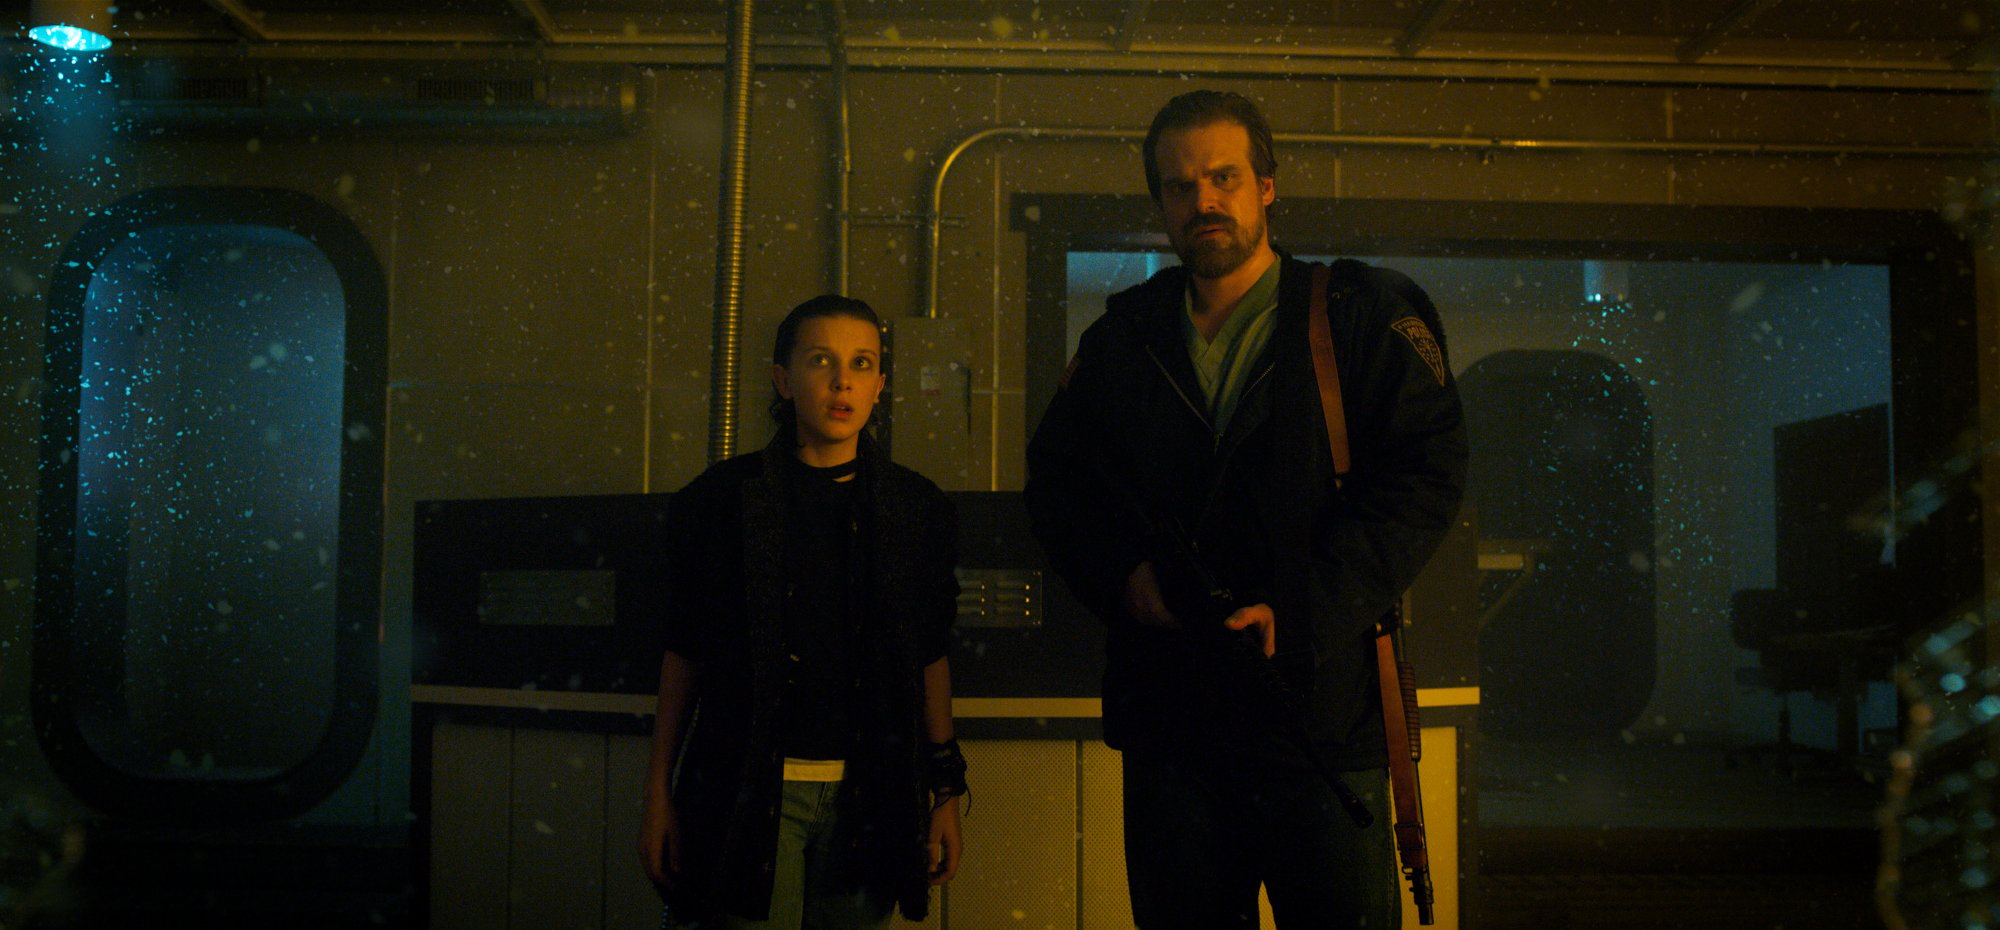 Millie Bobby Brown and David Harbour as Eleven and Hopper in Stranger Things. They're standing next to one another and Eleven is dressed in black clothes with her hair slicked back